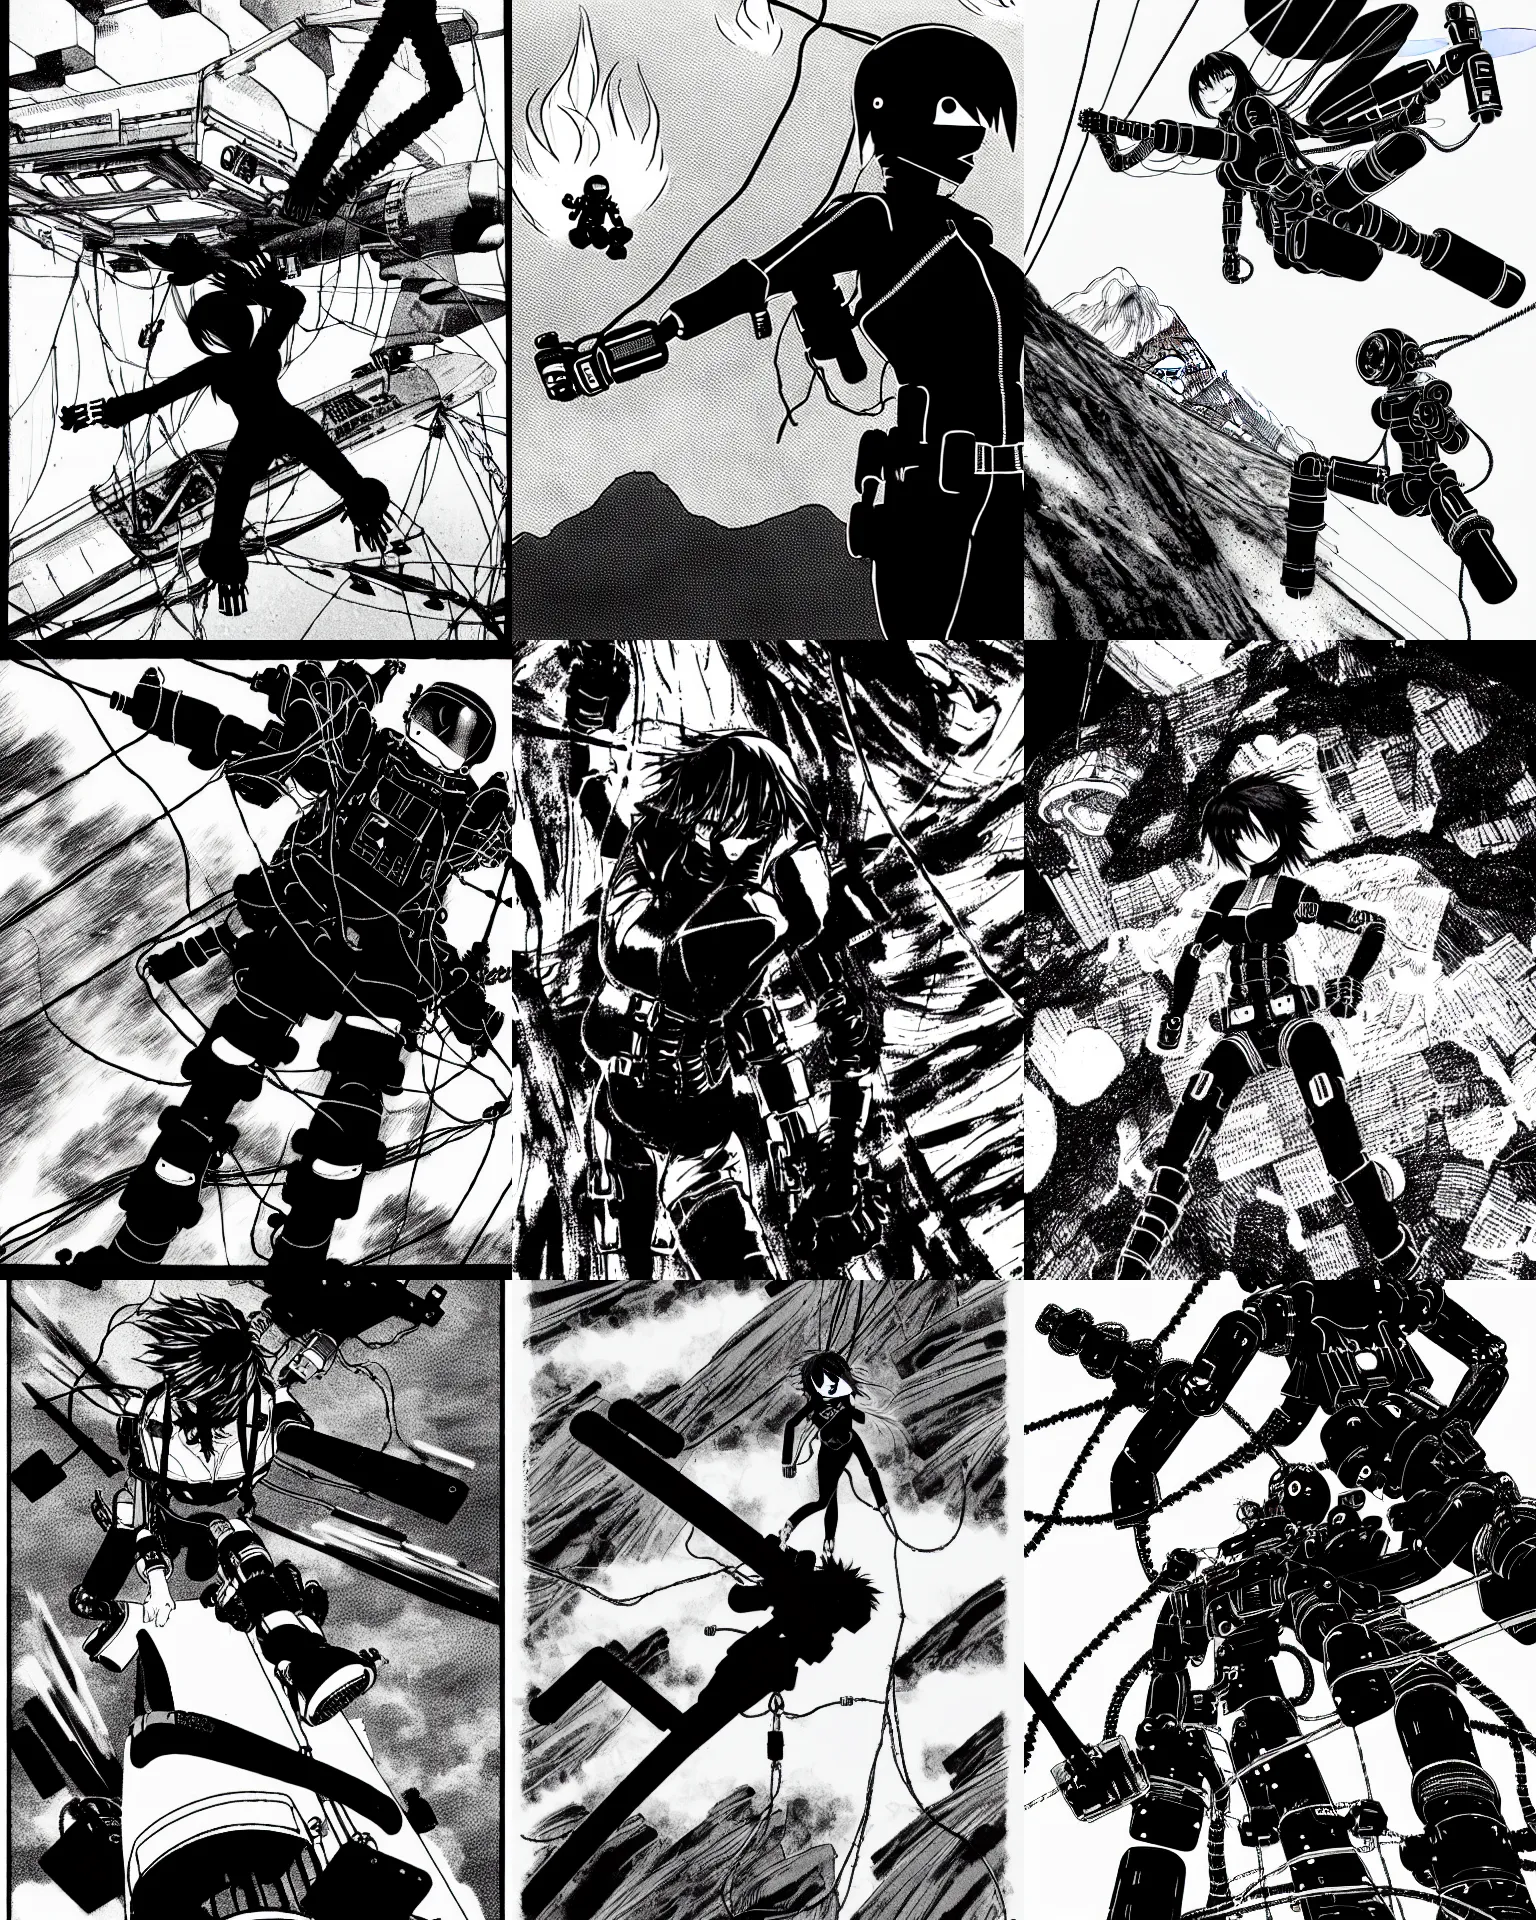 Prompt: black widow red hair flies with a parachute from everest and fires pistols at robots with techno details, by tsutomu nihei, black and white, wires clouds background